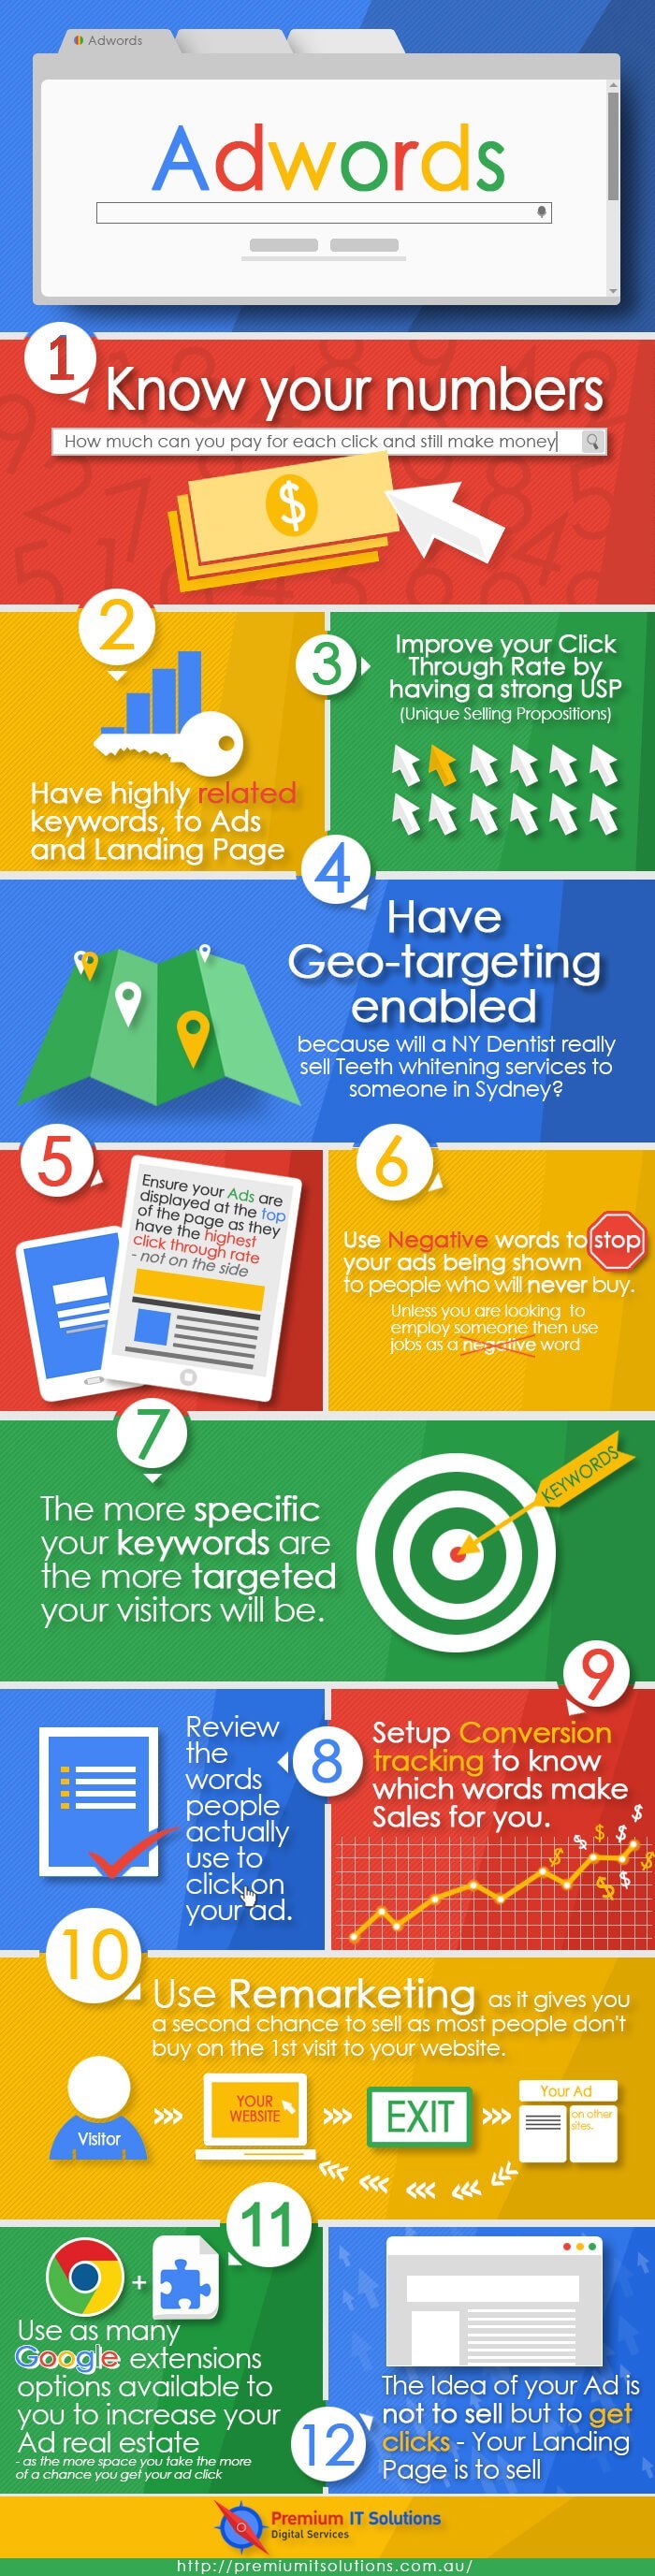 12 steps to becoming a Google AdWords Expert (Infographic)